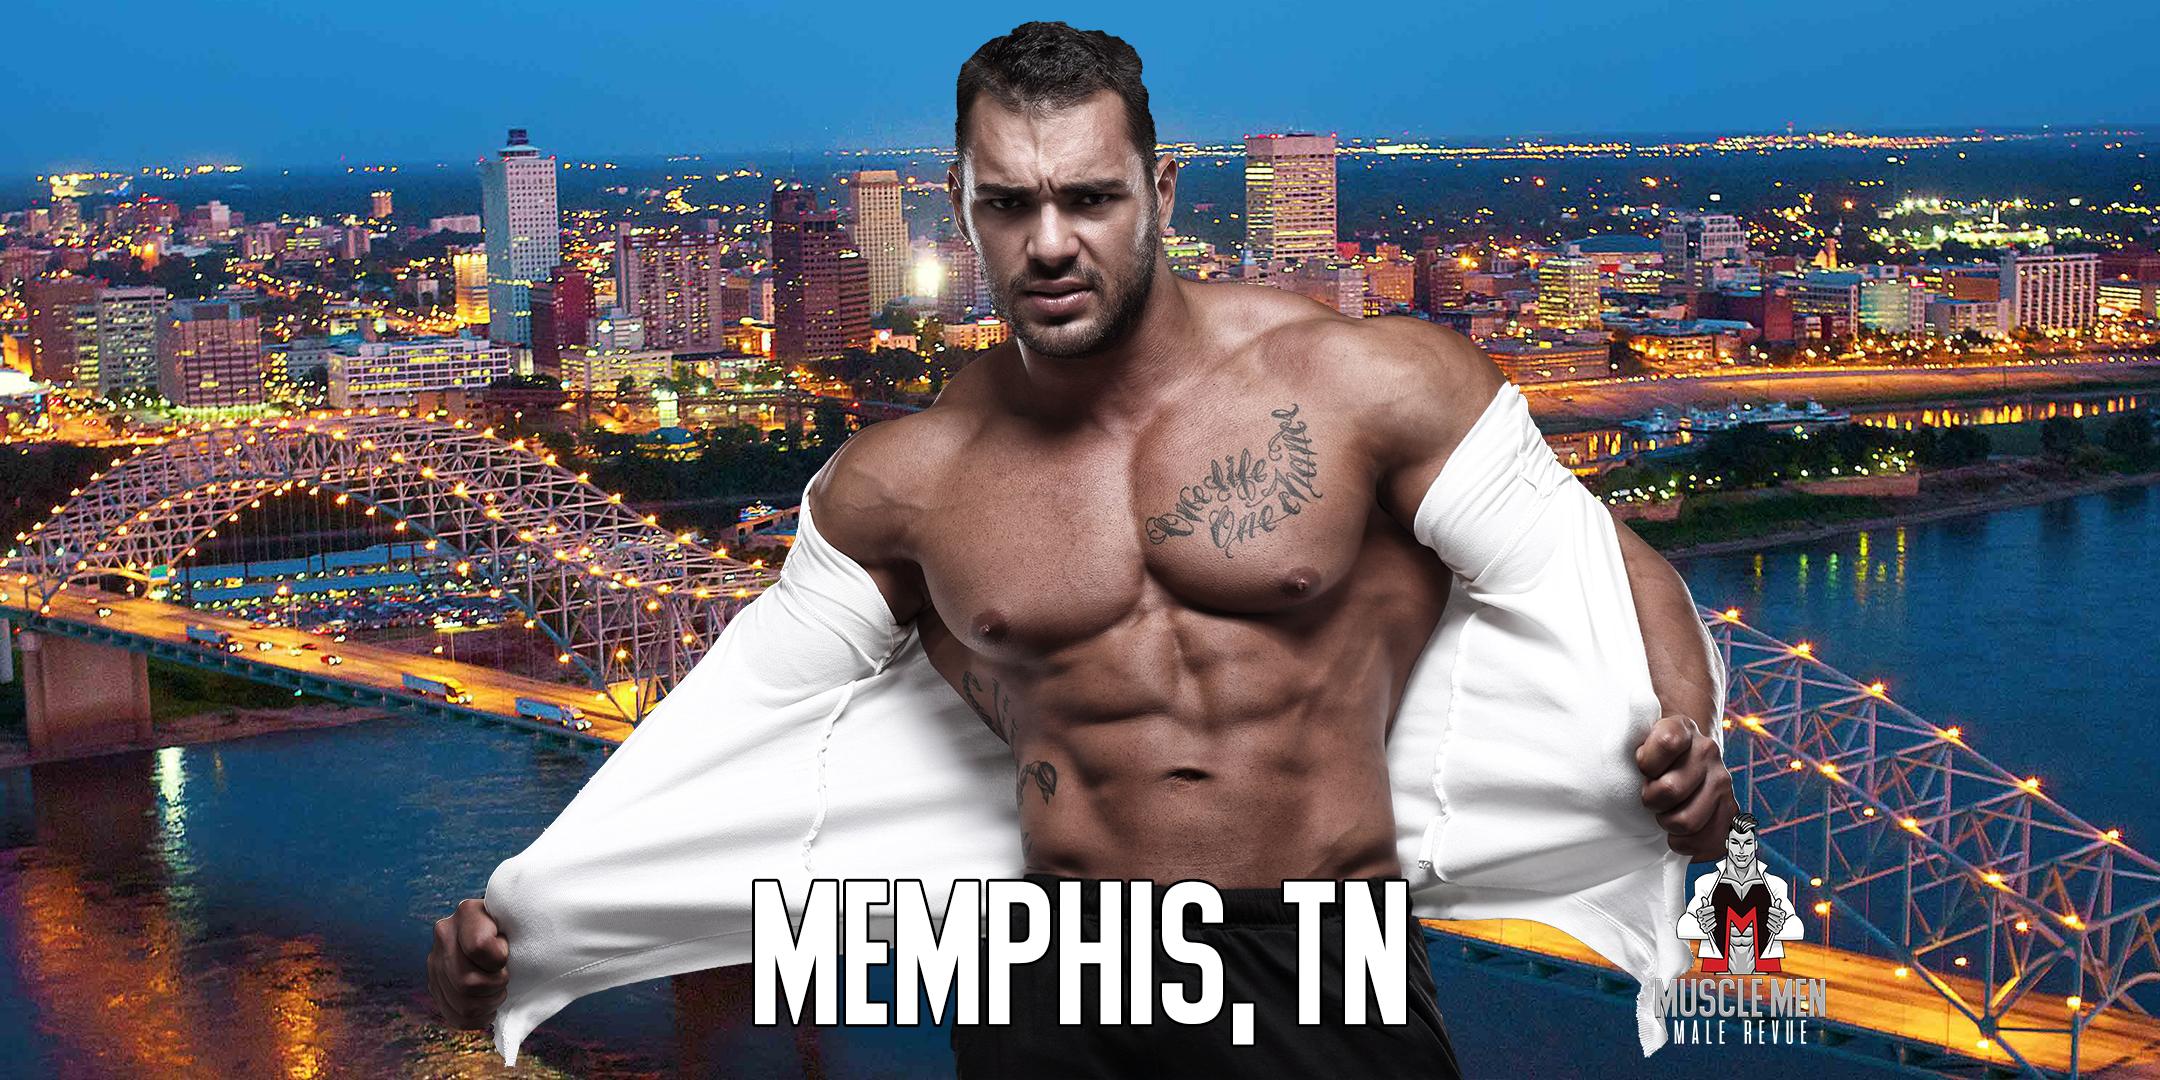 Muscle Men Male Strippers Revue And Male Strip Club Shows Memphis Tn 8 Pm 10 Pm 18 Sep 2020